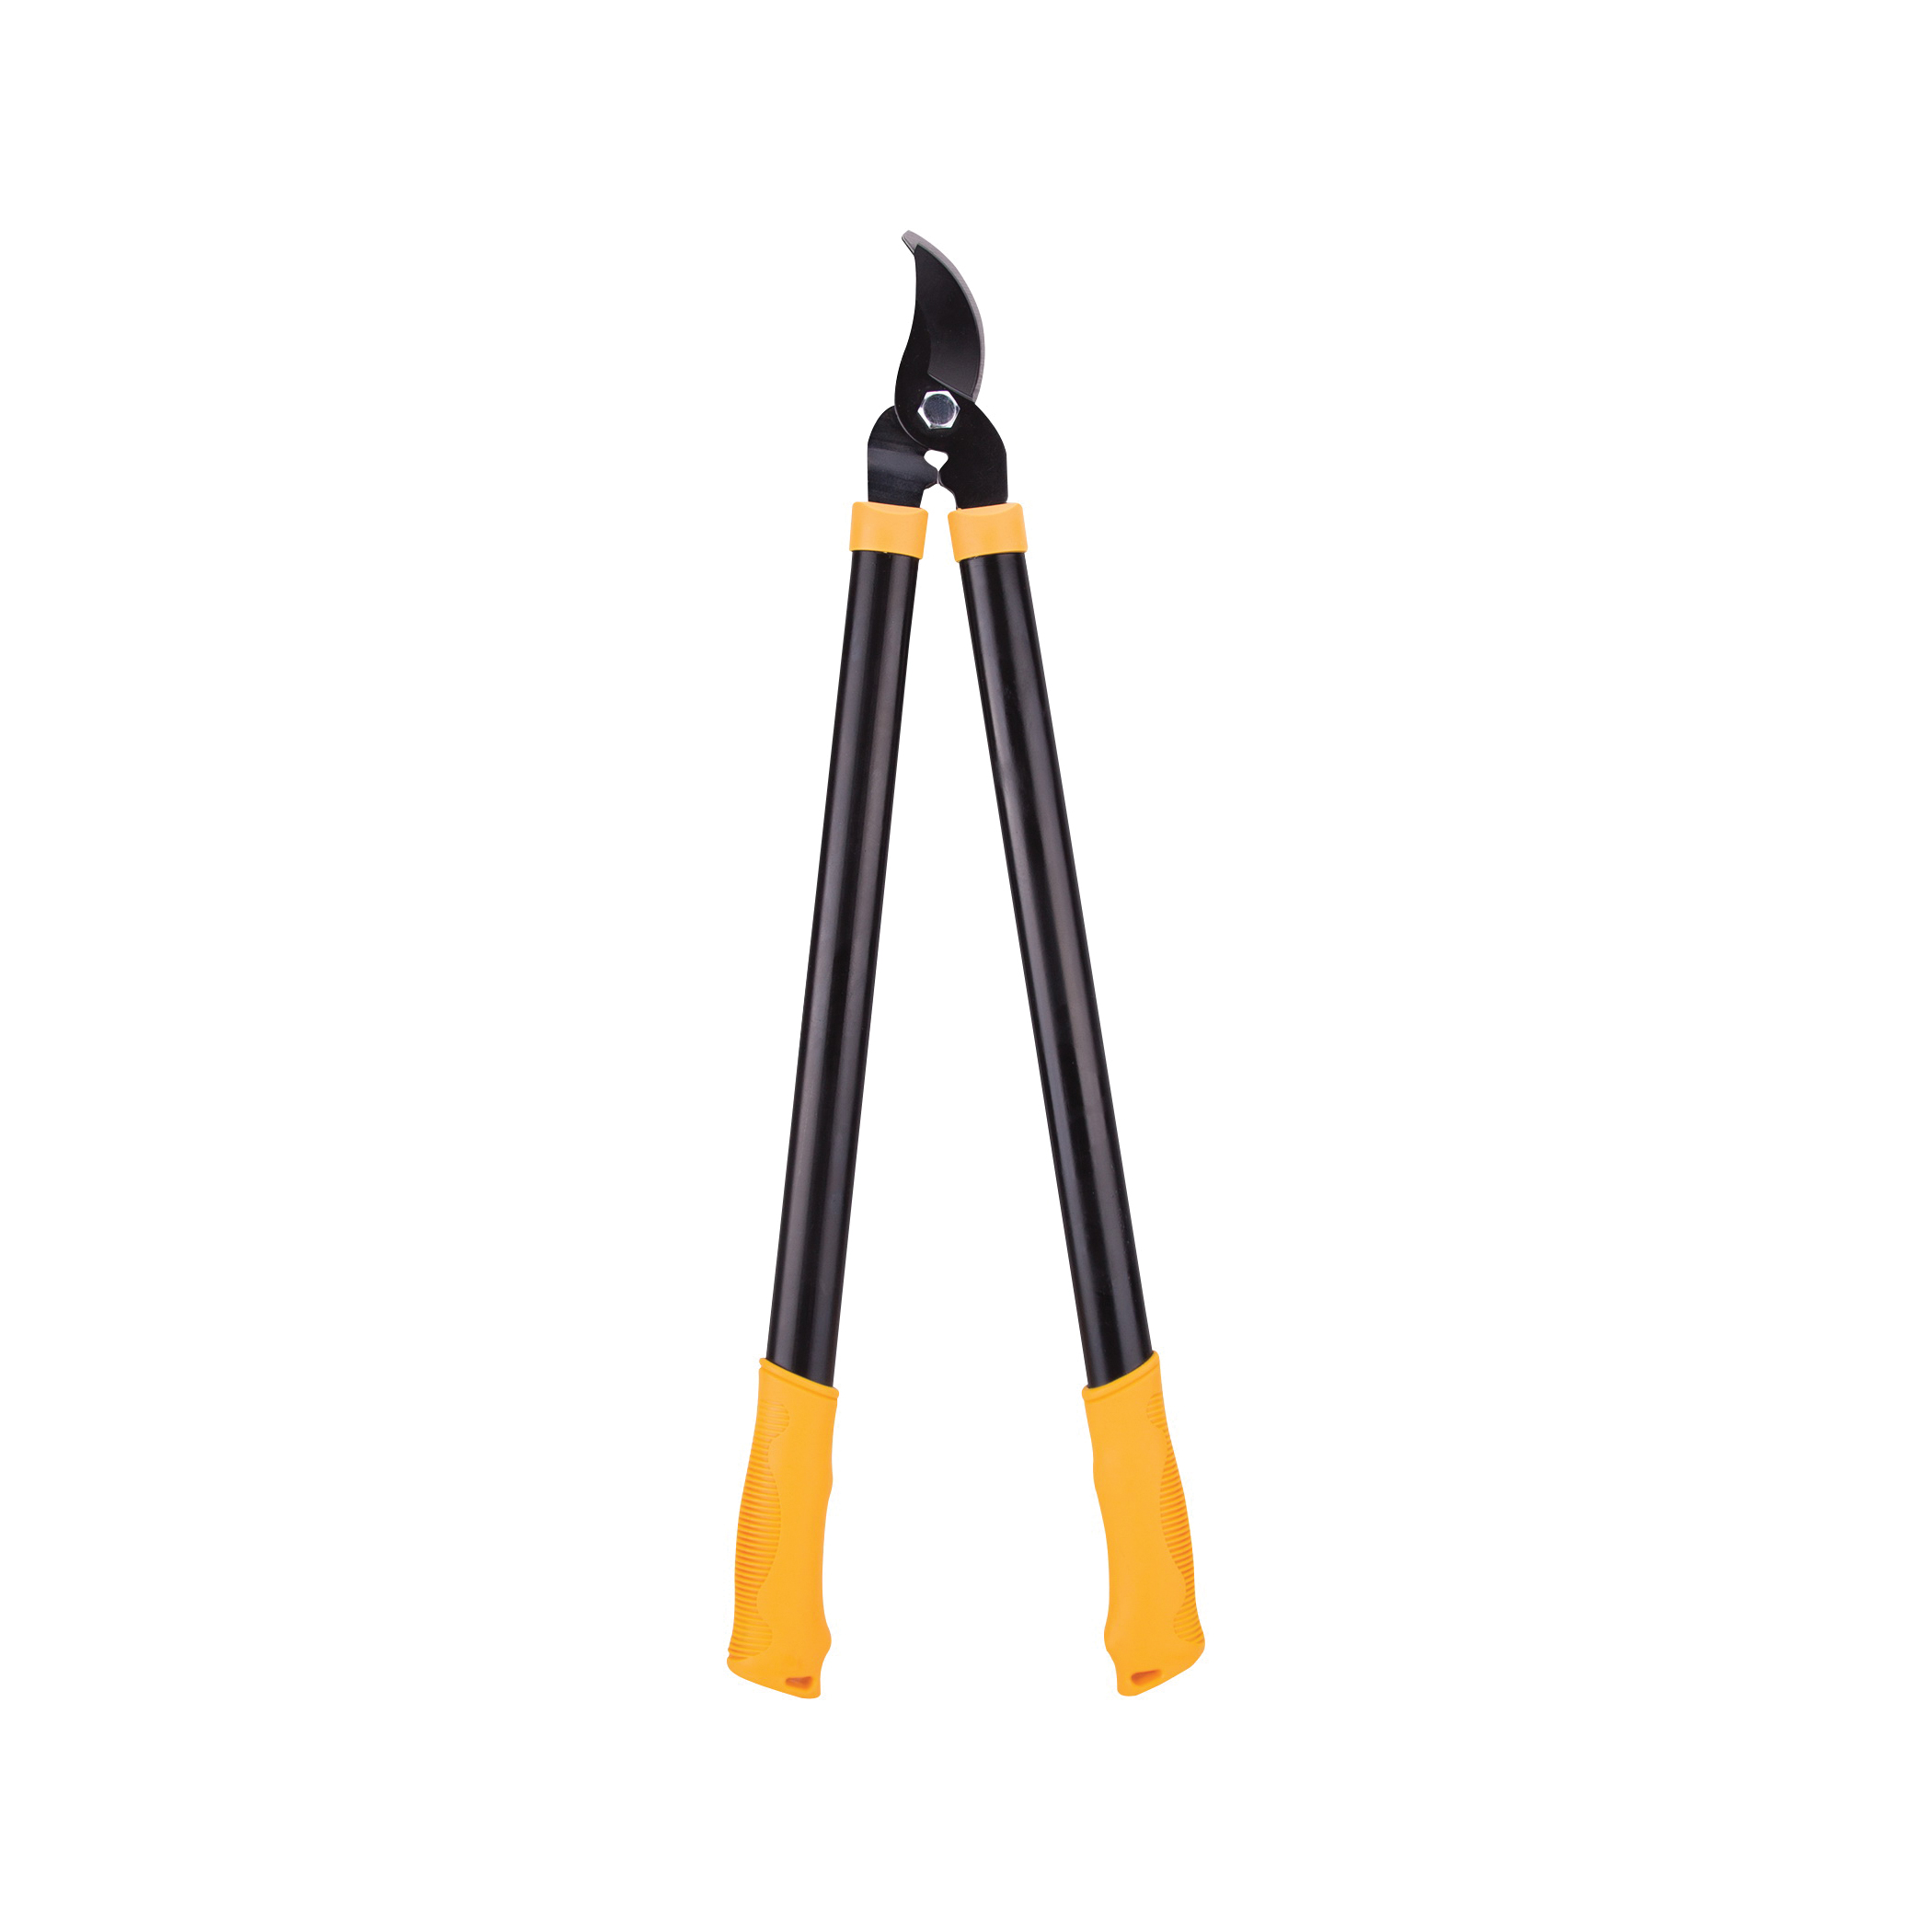 GL4011 Bypass Lopper, 1-1/4 in Cutting Capacity, Steel Blade, Steel Handle, Cushion grip Handle